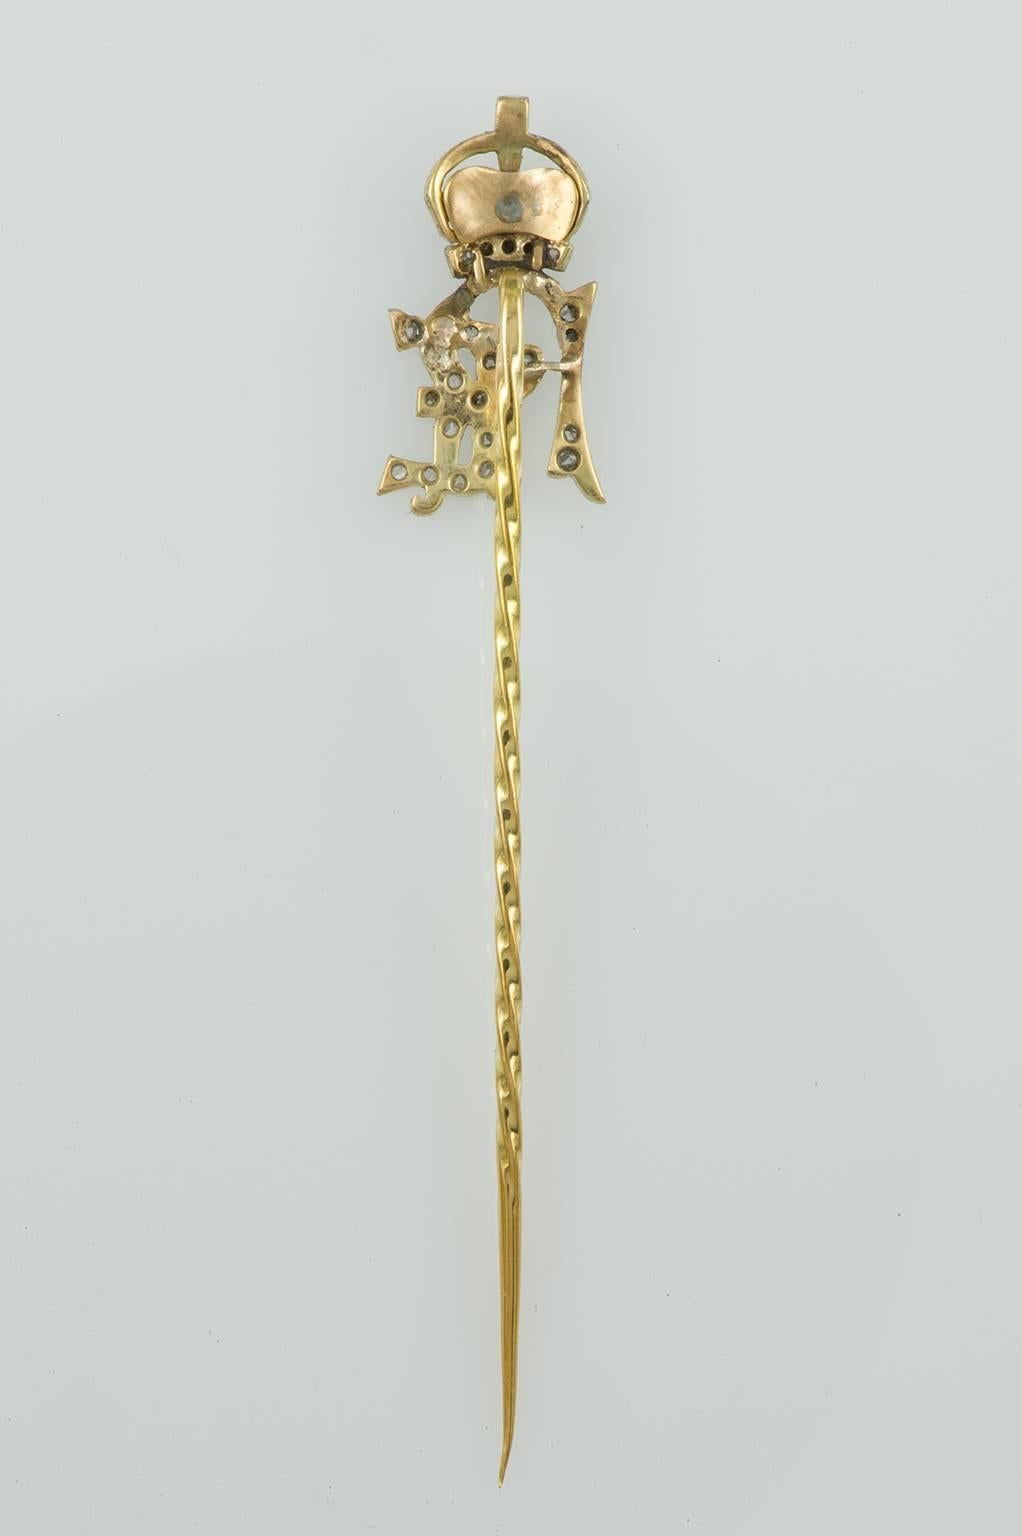 G/268 - 
Antique golden hat-pin with little brilliants, with crown and initials R E.
 Taste of the dandies of yesteryear   -  For the English knot tie or ascot at the end of the eighteenth century.
From the mid-1800s the single brooch triumphed. 